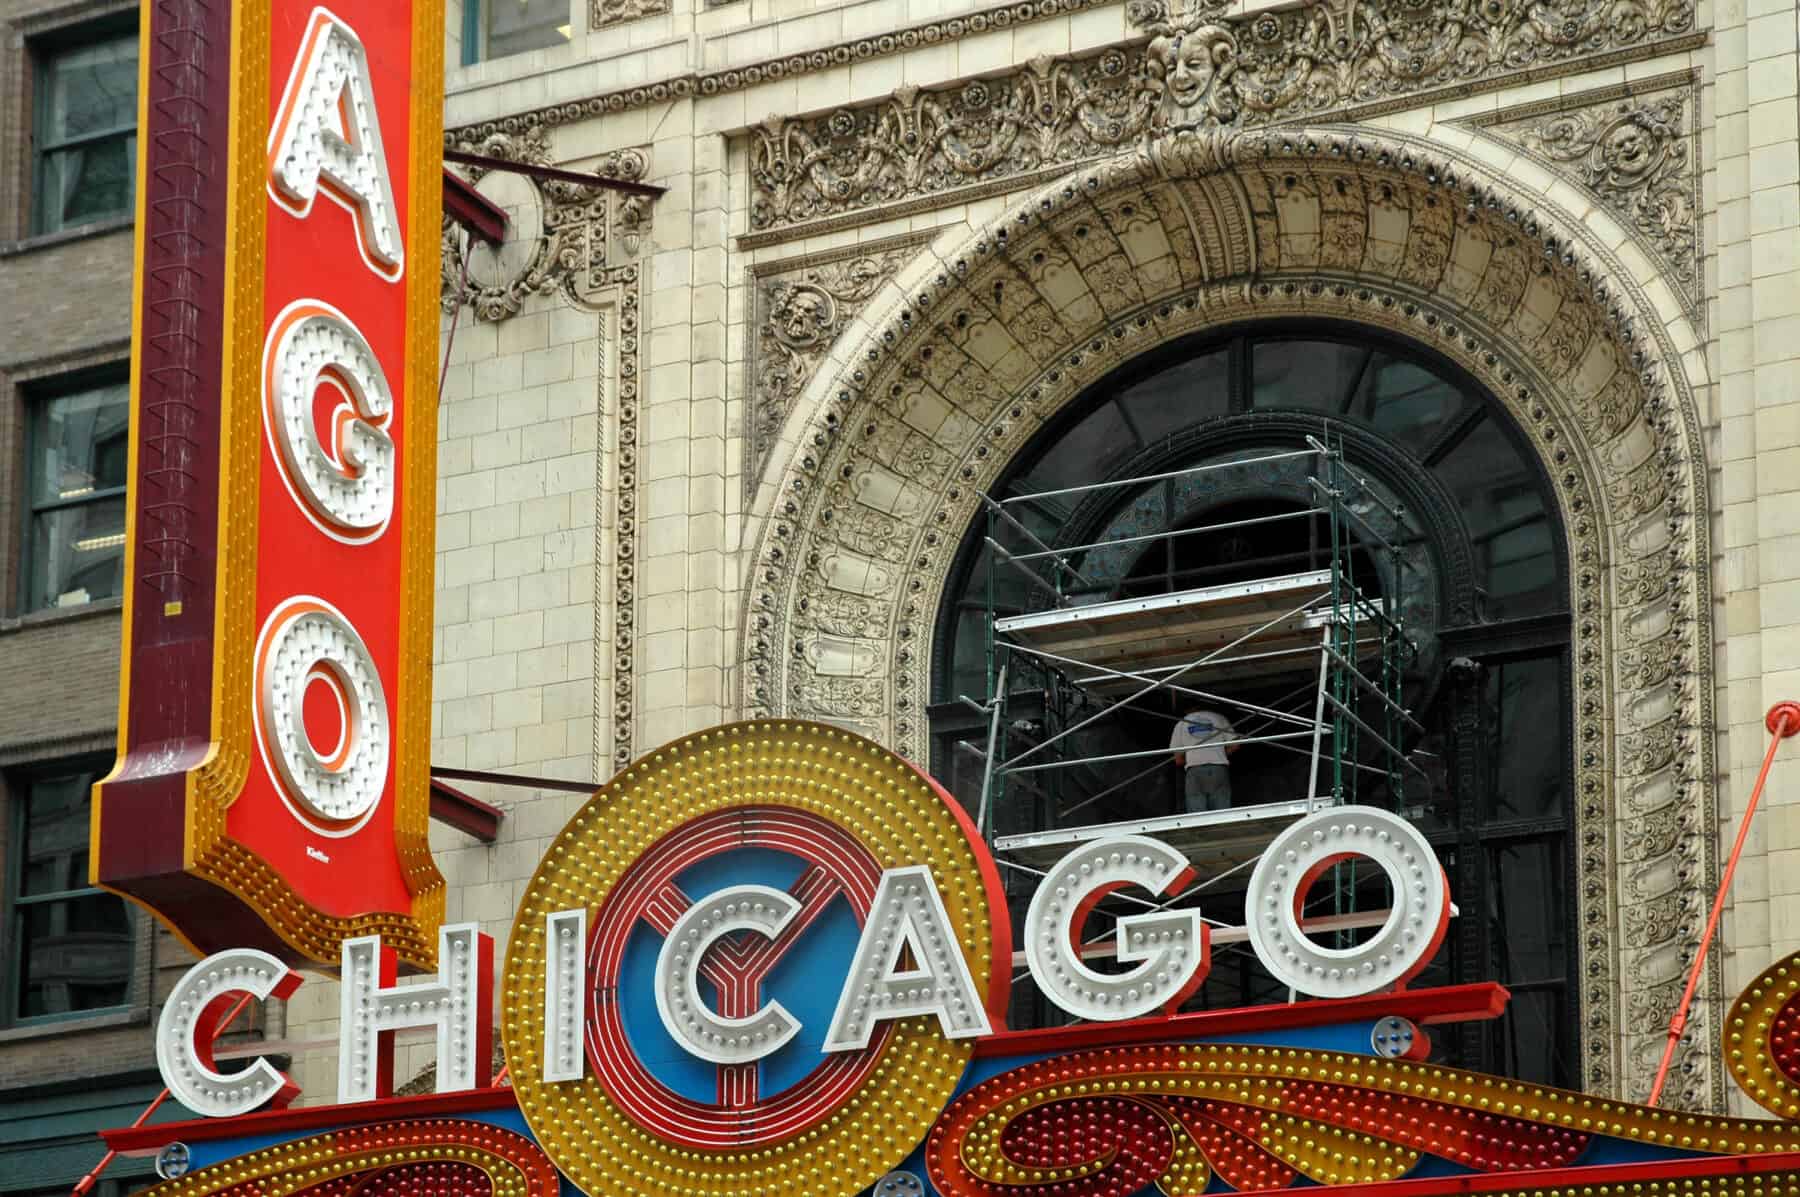 Custom Fabrication of Architectural Glass for Chicago Theater Historic Window from Construction Specialty Projects by Commercial Builder & General Contractor Structural Enterprises